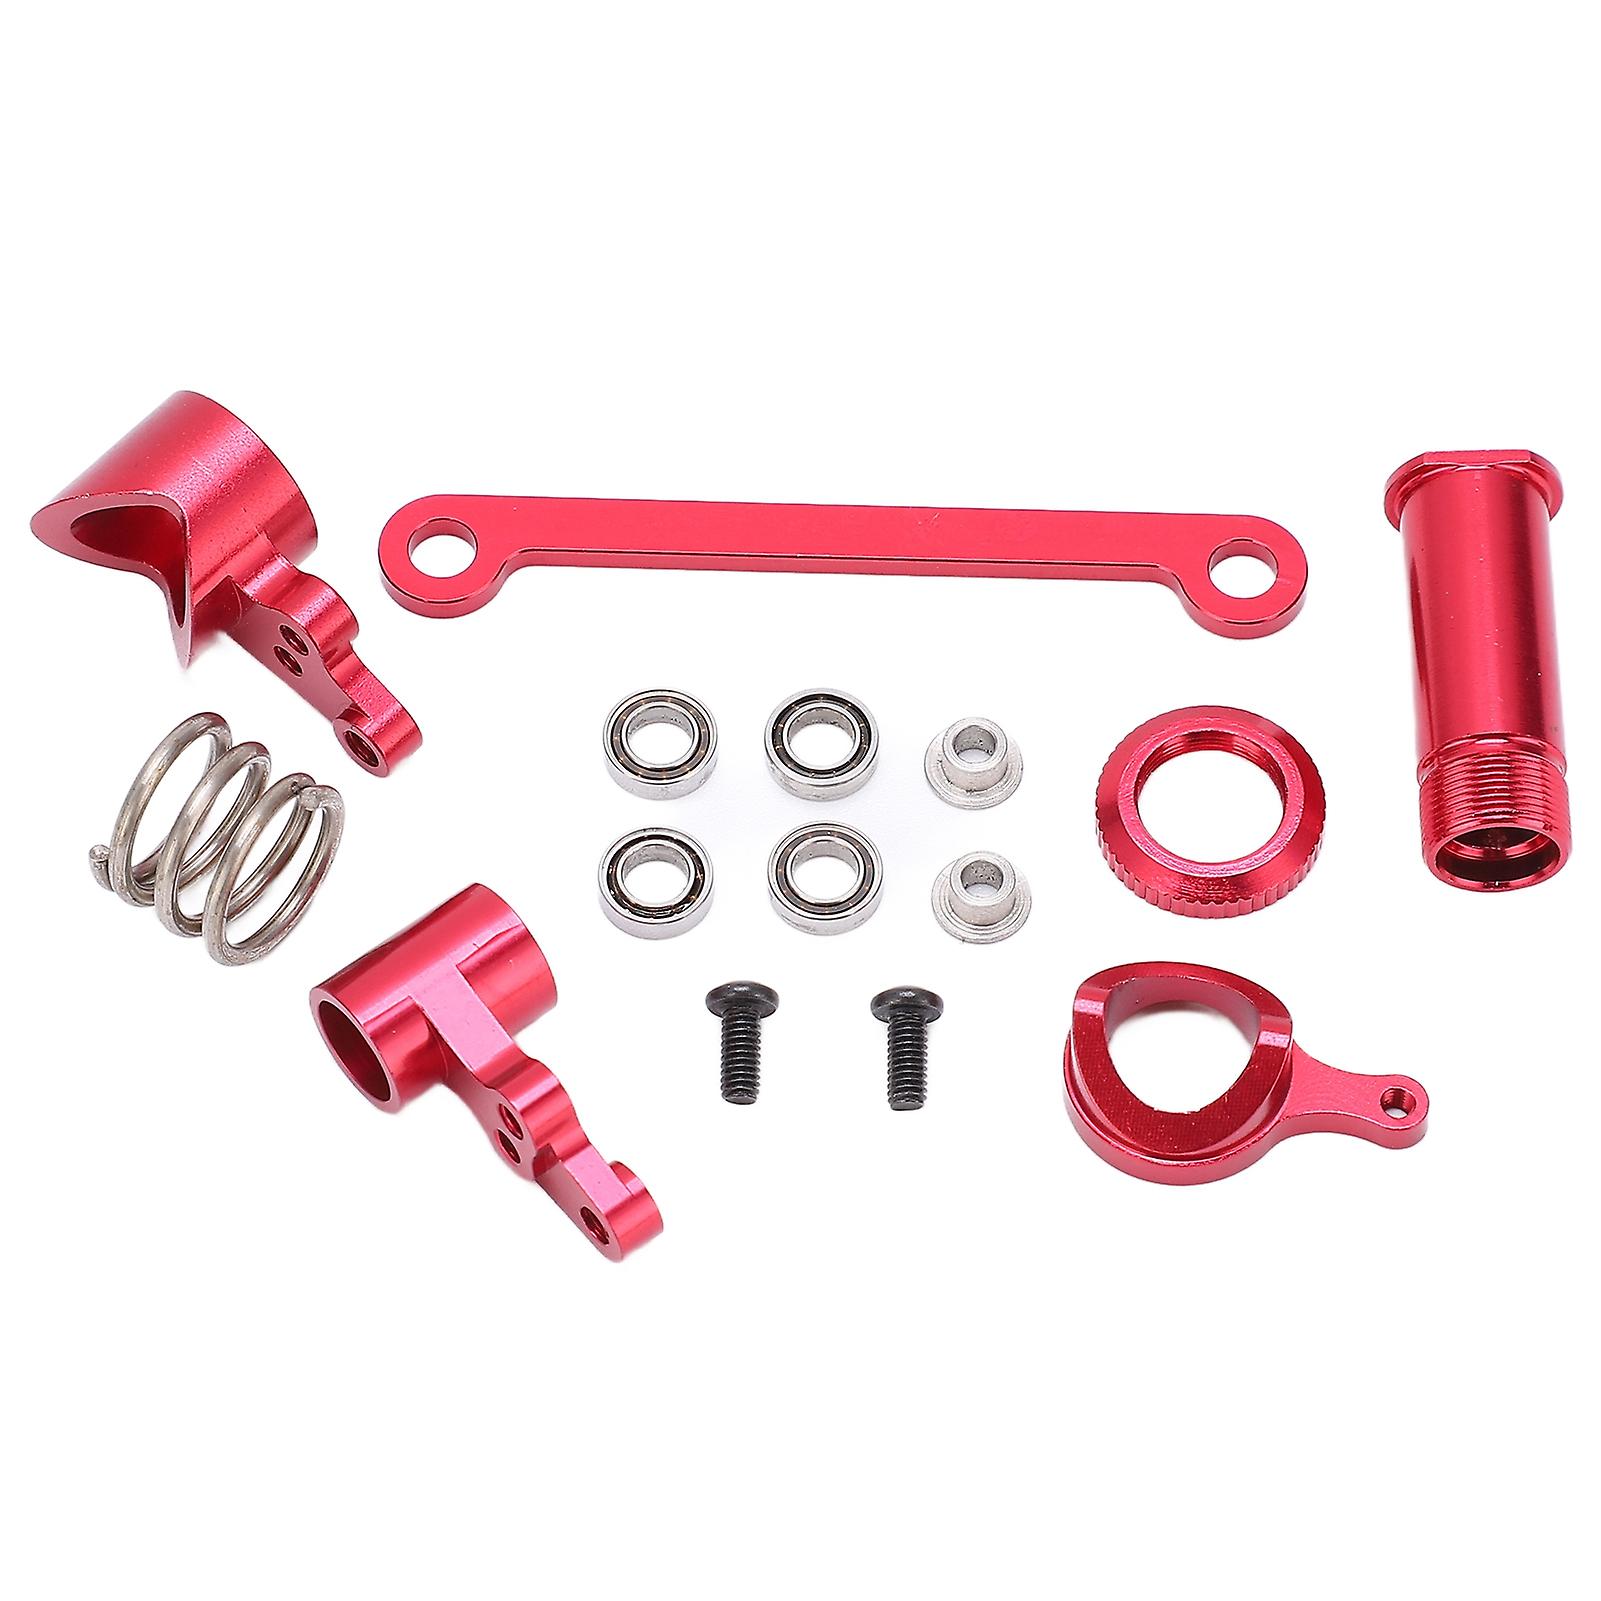 Rc Steering Knuckle Assembly Kit Aluminum Alloy For Lc Racing 1/14 Rc Car Truck Crawler Toysred